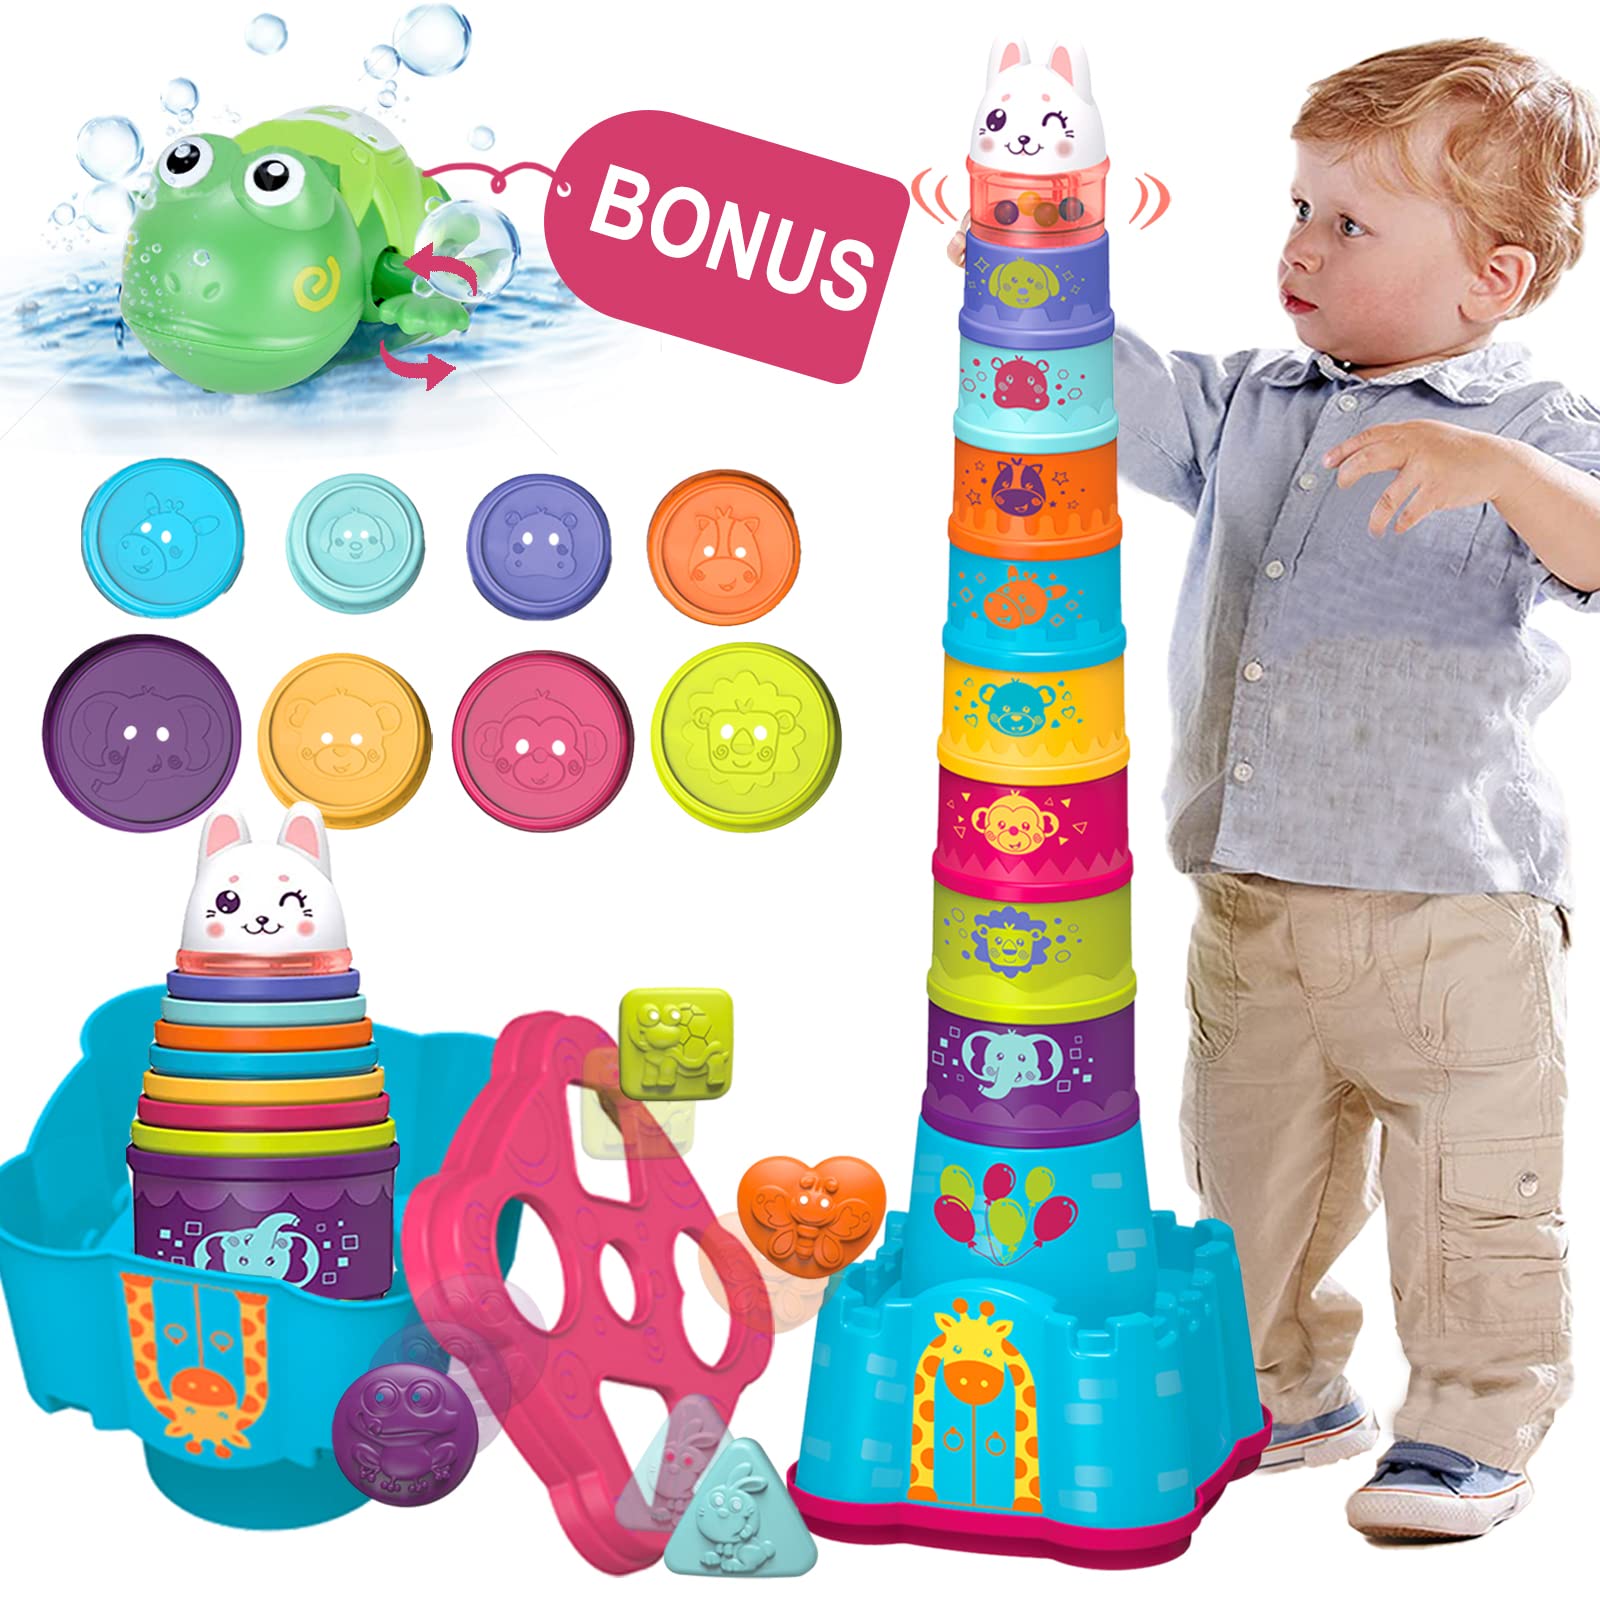 Baby Stacking Toys for Toddlers 1-3, Nesting Cups Shape Sorter for Infant 6 to 12-18 Months, Stackable Blocks Learning Toy with Rattle & Free Frog Bath Toy, Birthday Gifts for Kids 9-12 Month Girl Boy